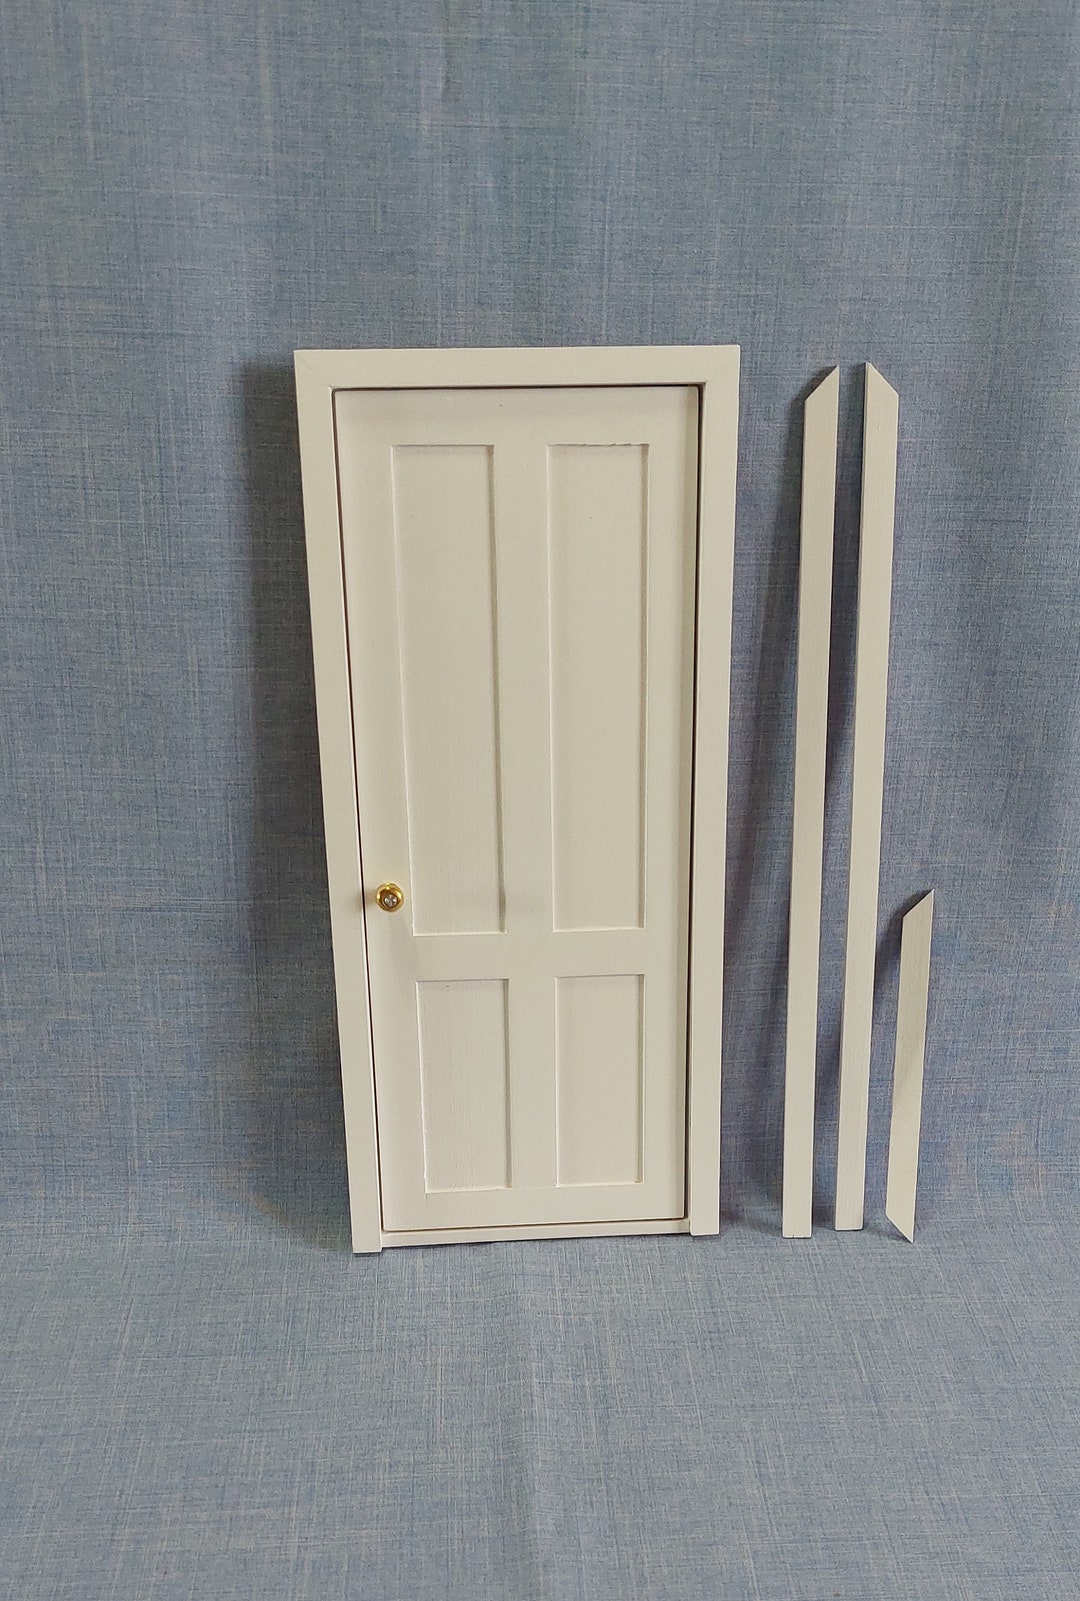 Double French Doors for Interior or Exterior - Dollhouses and More